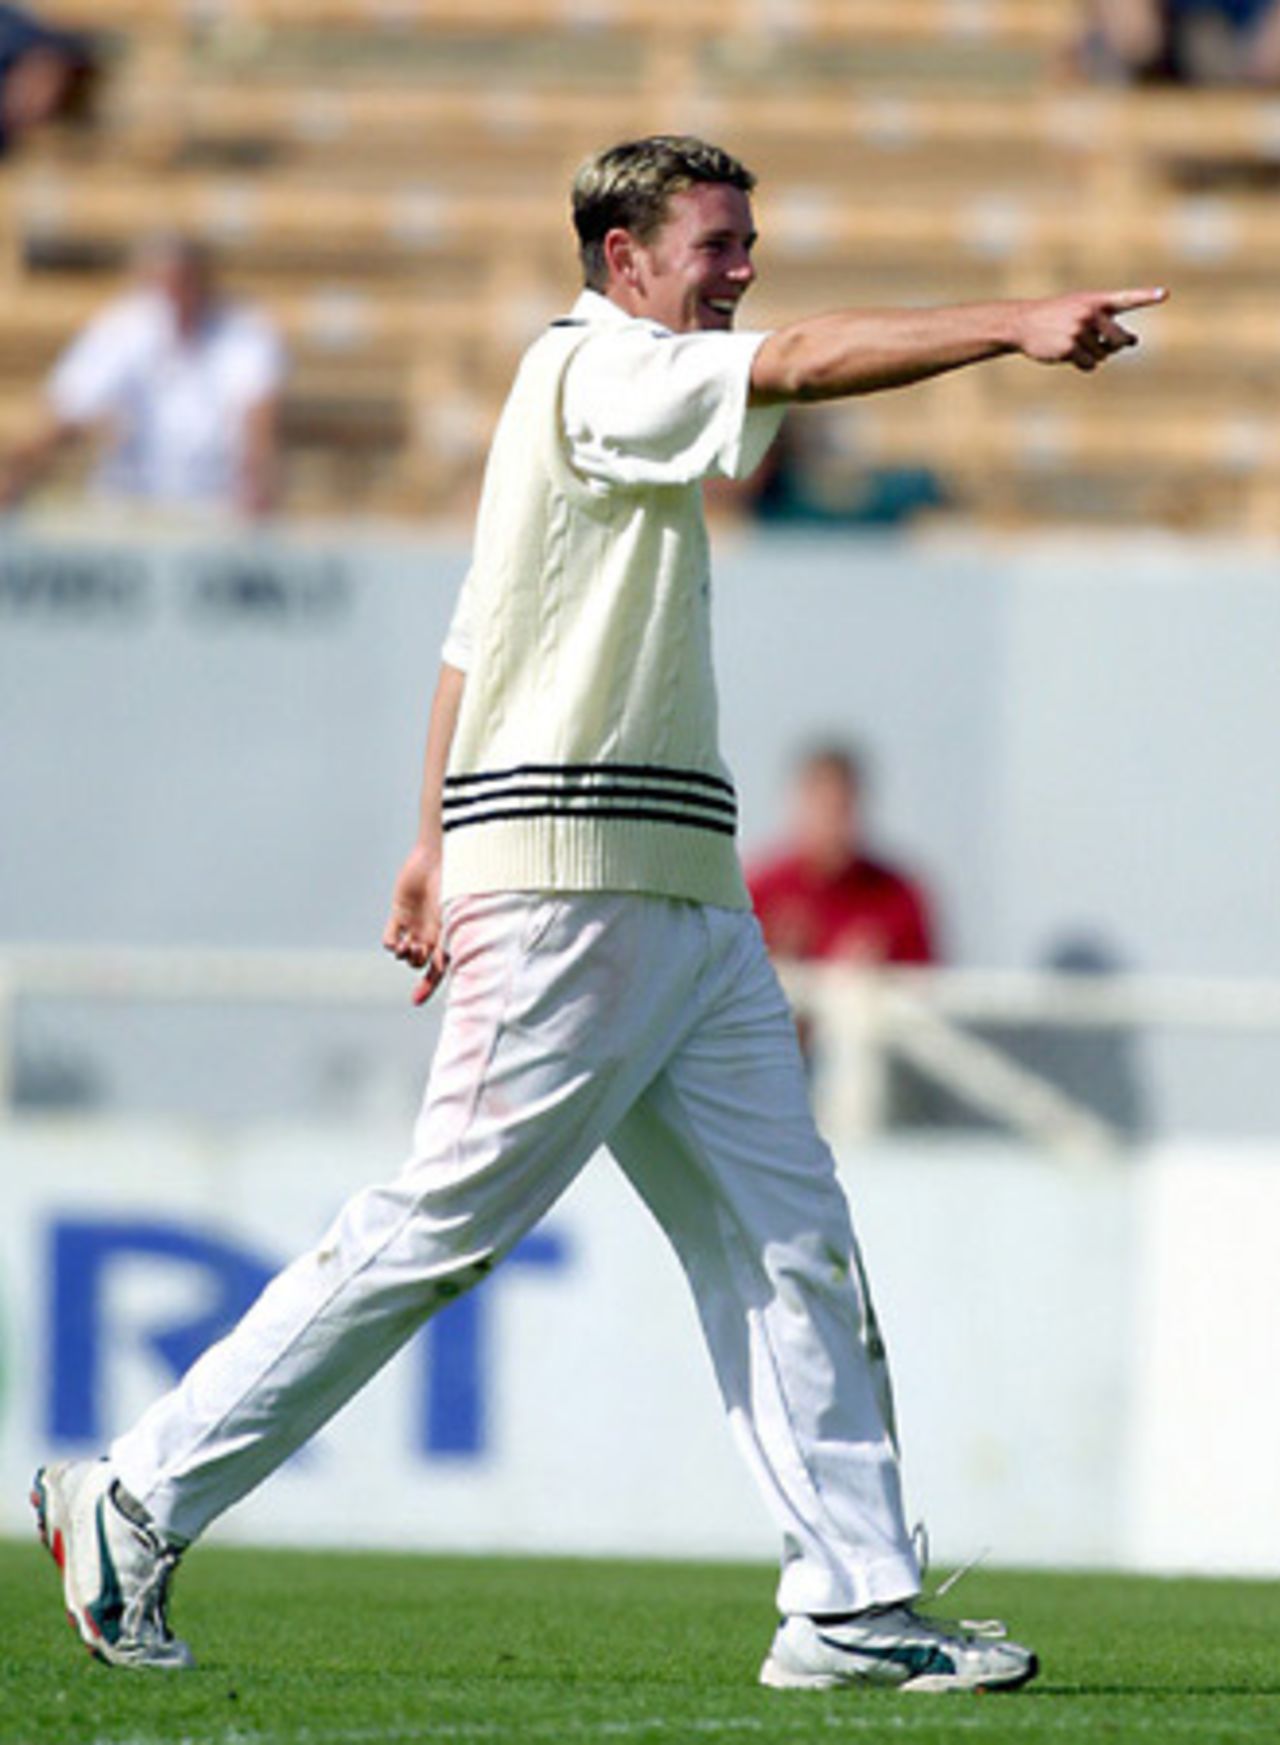 New Zealand bowler Ian Butler celebrates the dismissal of England batsman Ashley Giles, caught by Chris Drum for eight. It was Butler's first wicket in his debut Test. 1st Test: New Zealand v England at Jade Stadium, Christchurch, 13-17 March 2002 (13 March 2002).